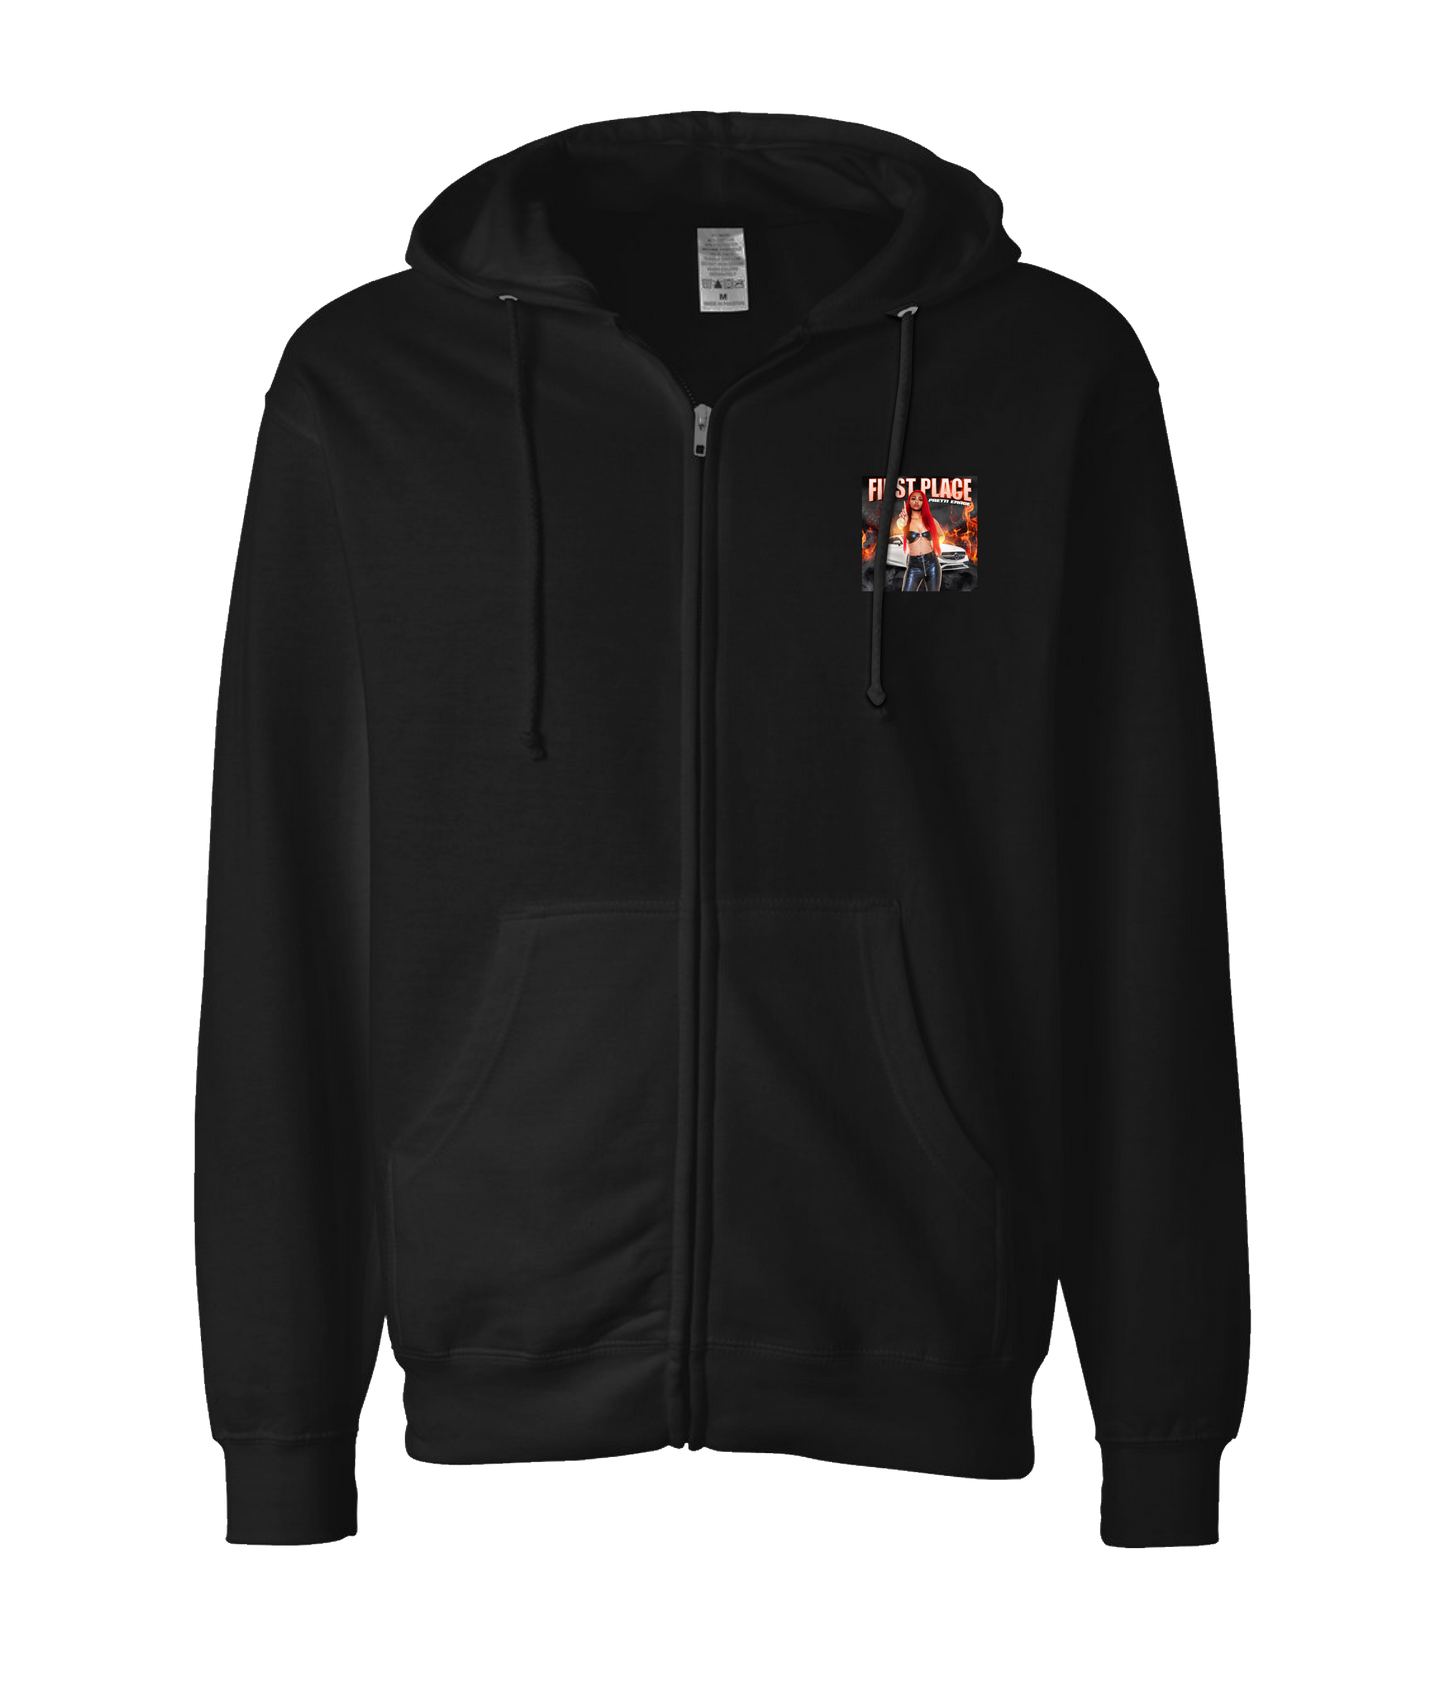 Pretti Emage - First Place - Black Zip Up Hoodie